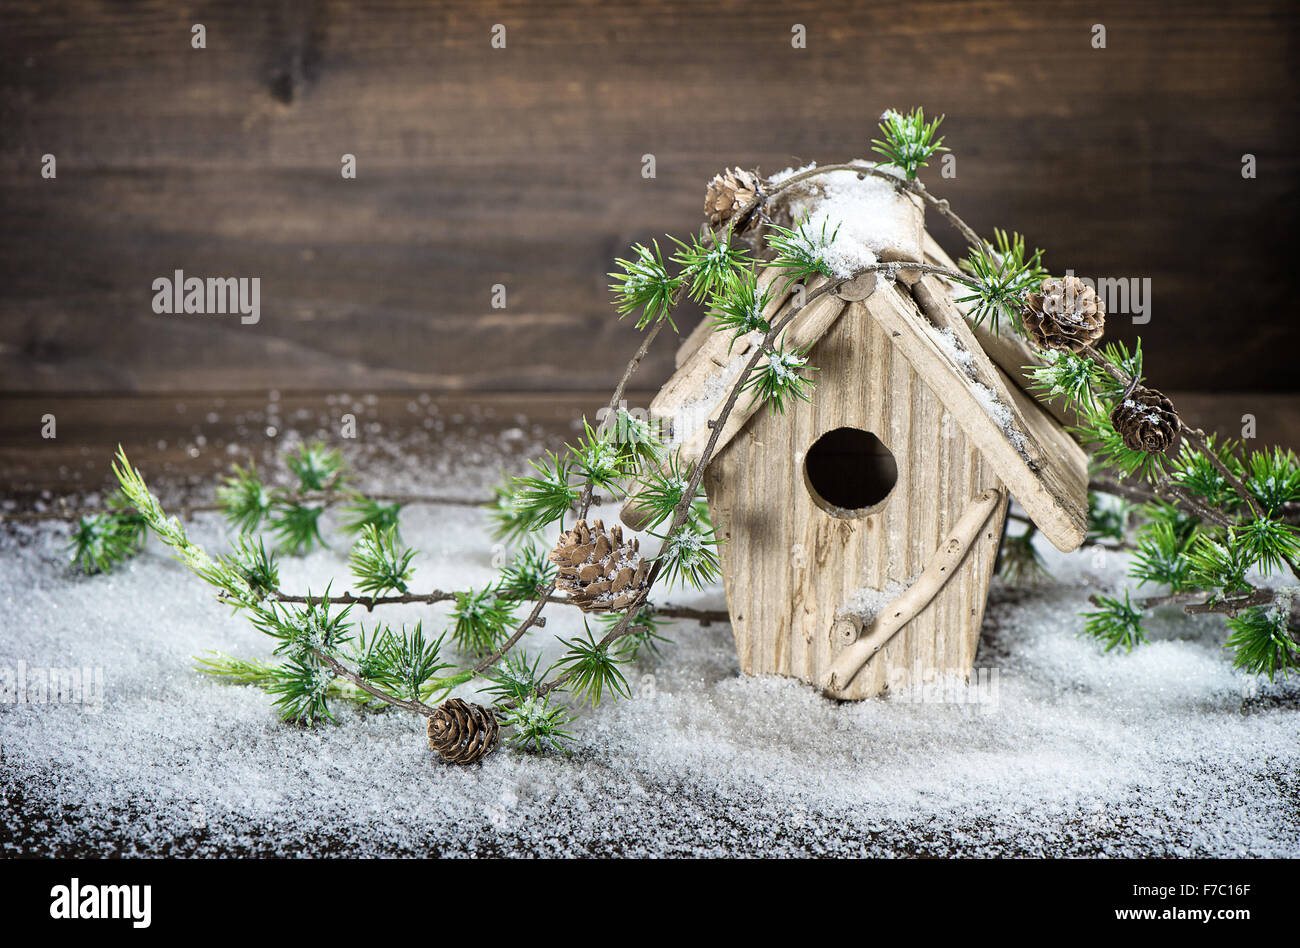 Birdhouse and christmas tree brunch decoration in snow over rustic wooden background. Stock Photo